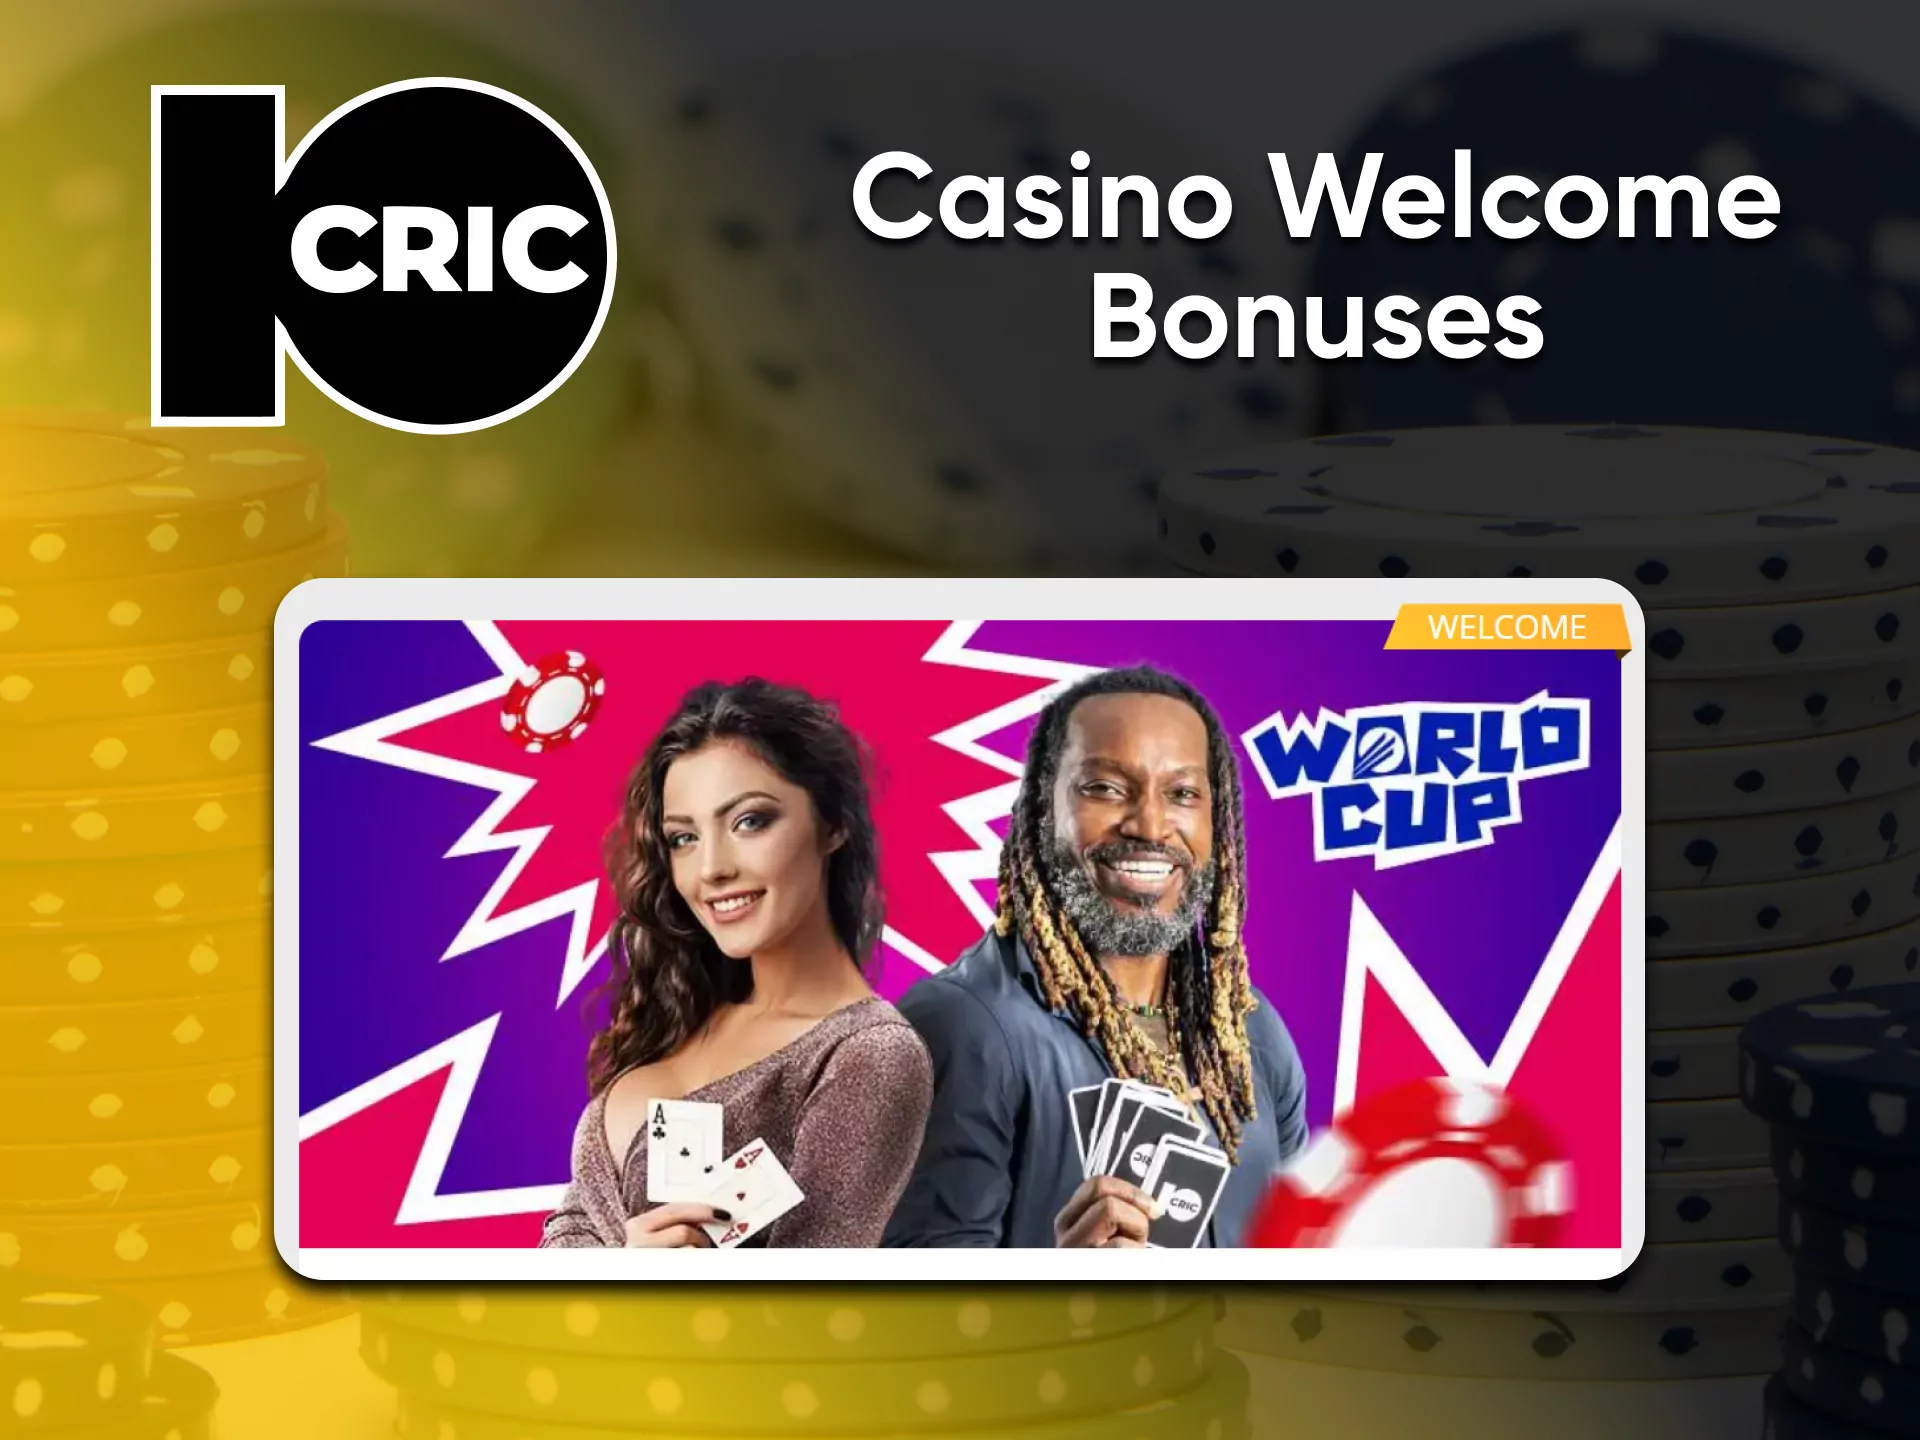 Fund your account to receive a bonus from 10cric.